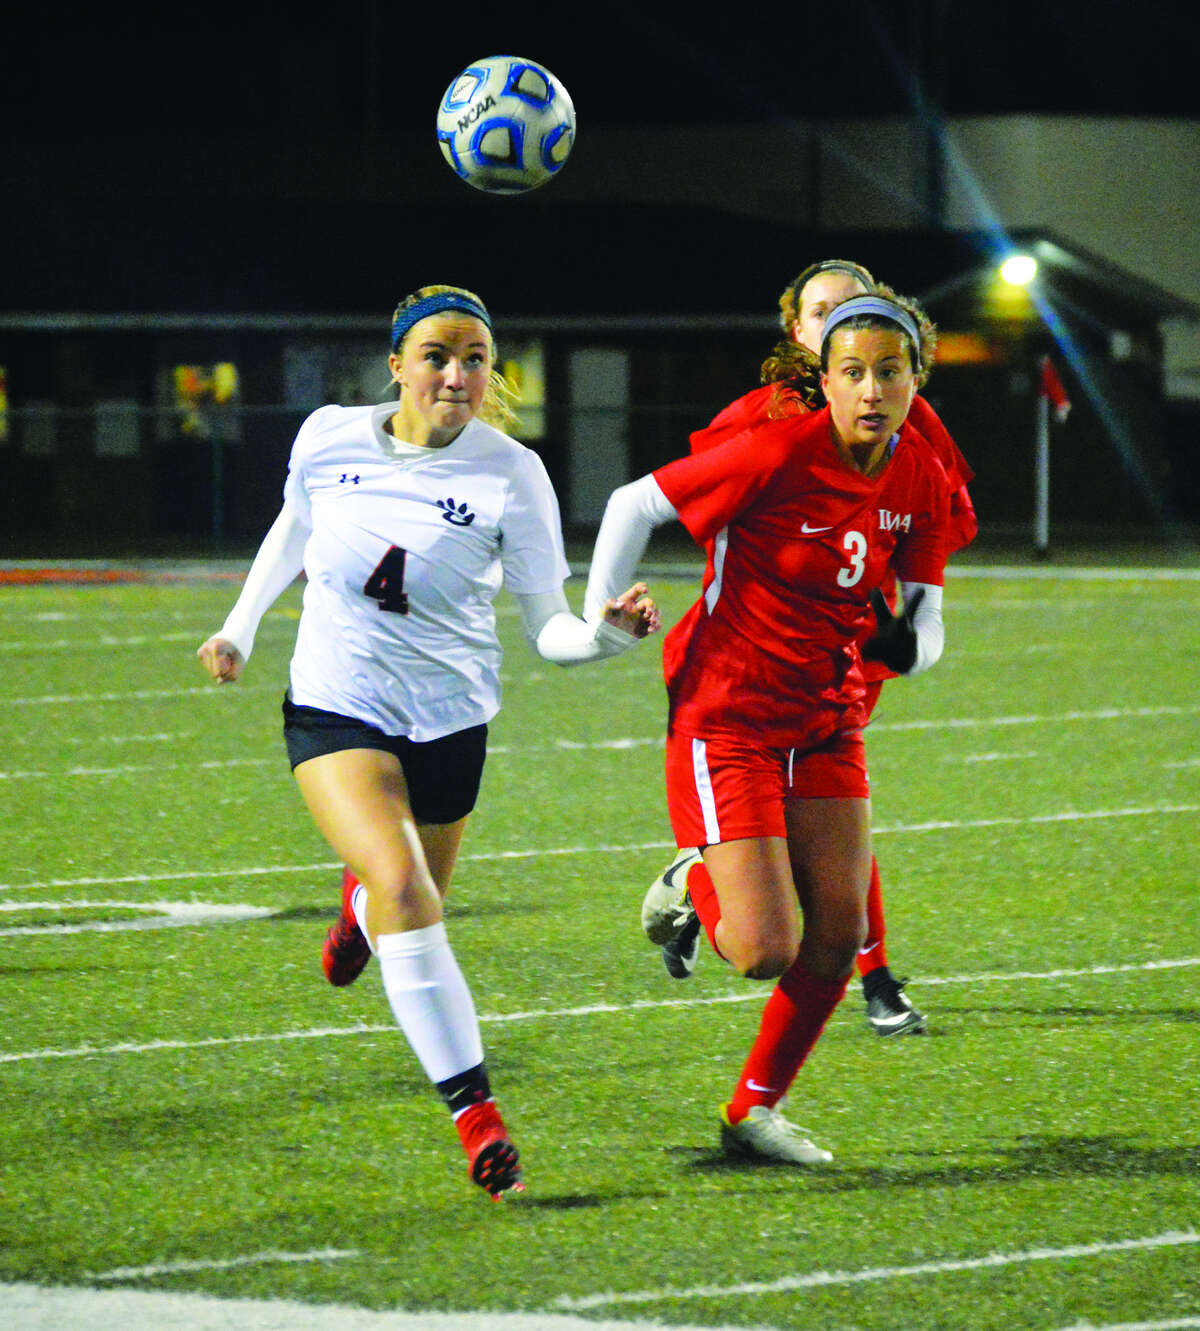 Edwardsville’s Emma Sitton, left, chases down a loose ball against Incarnate Word’s Maggie O’Brien in the second half.